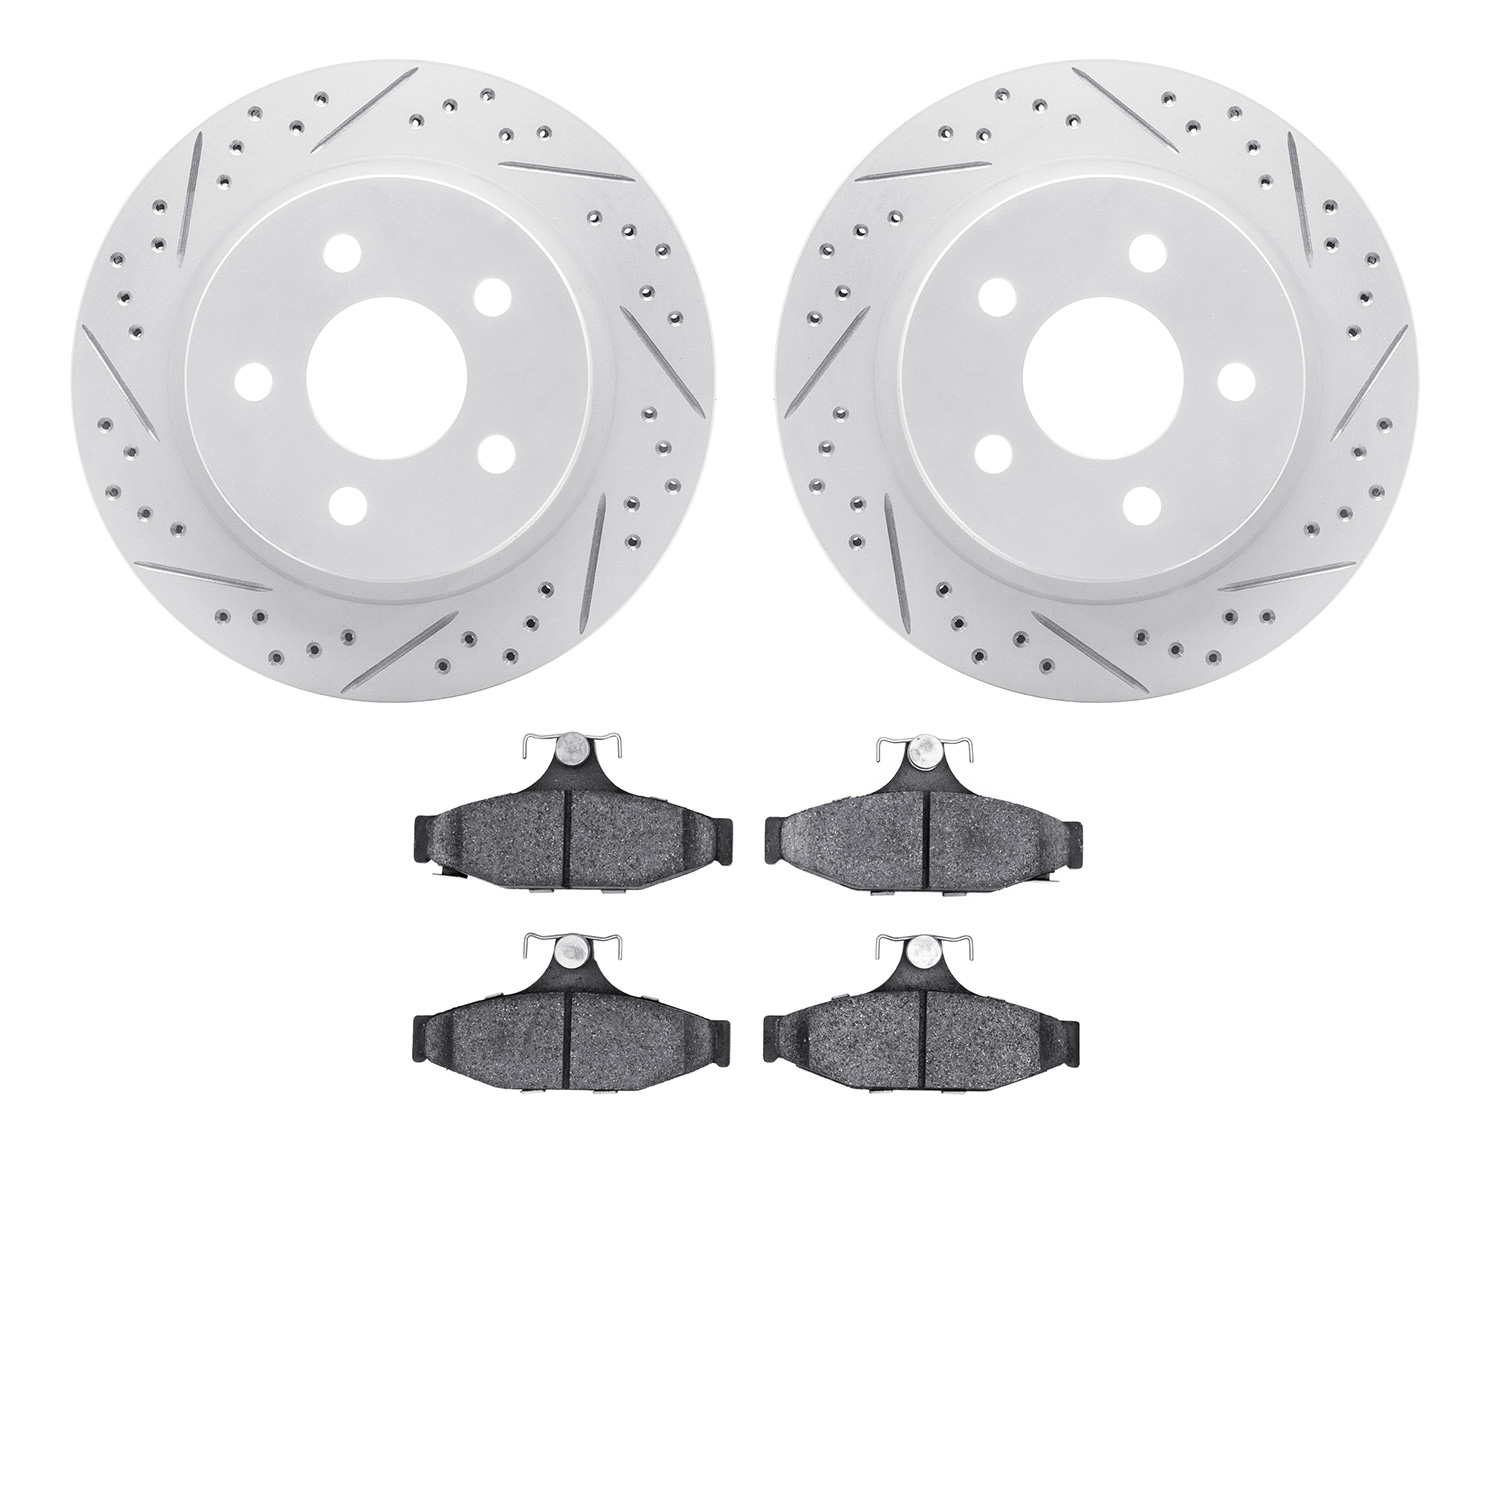 2502-47008 Geoperformance Drilled/Slotted Rotors w/5000 Advanced Brake Pads Kit, 1993-1997 GM, Position: Rear